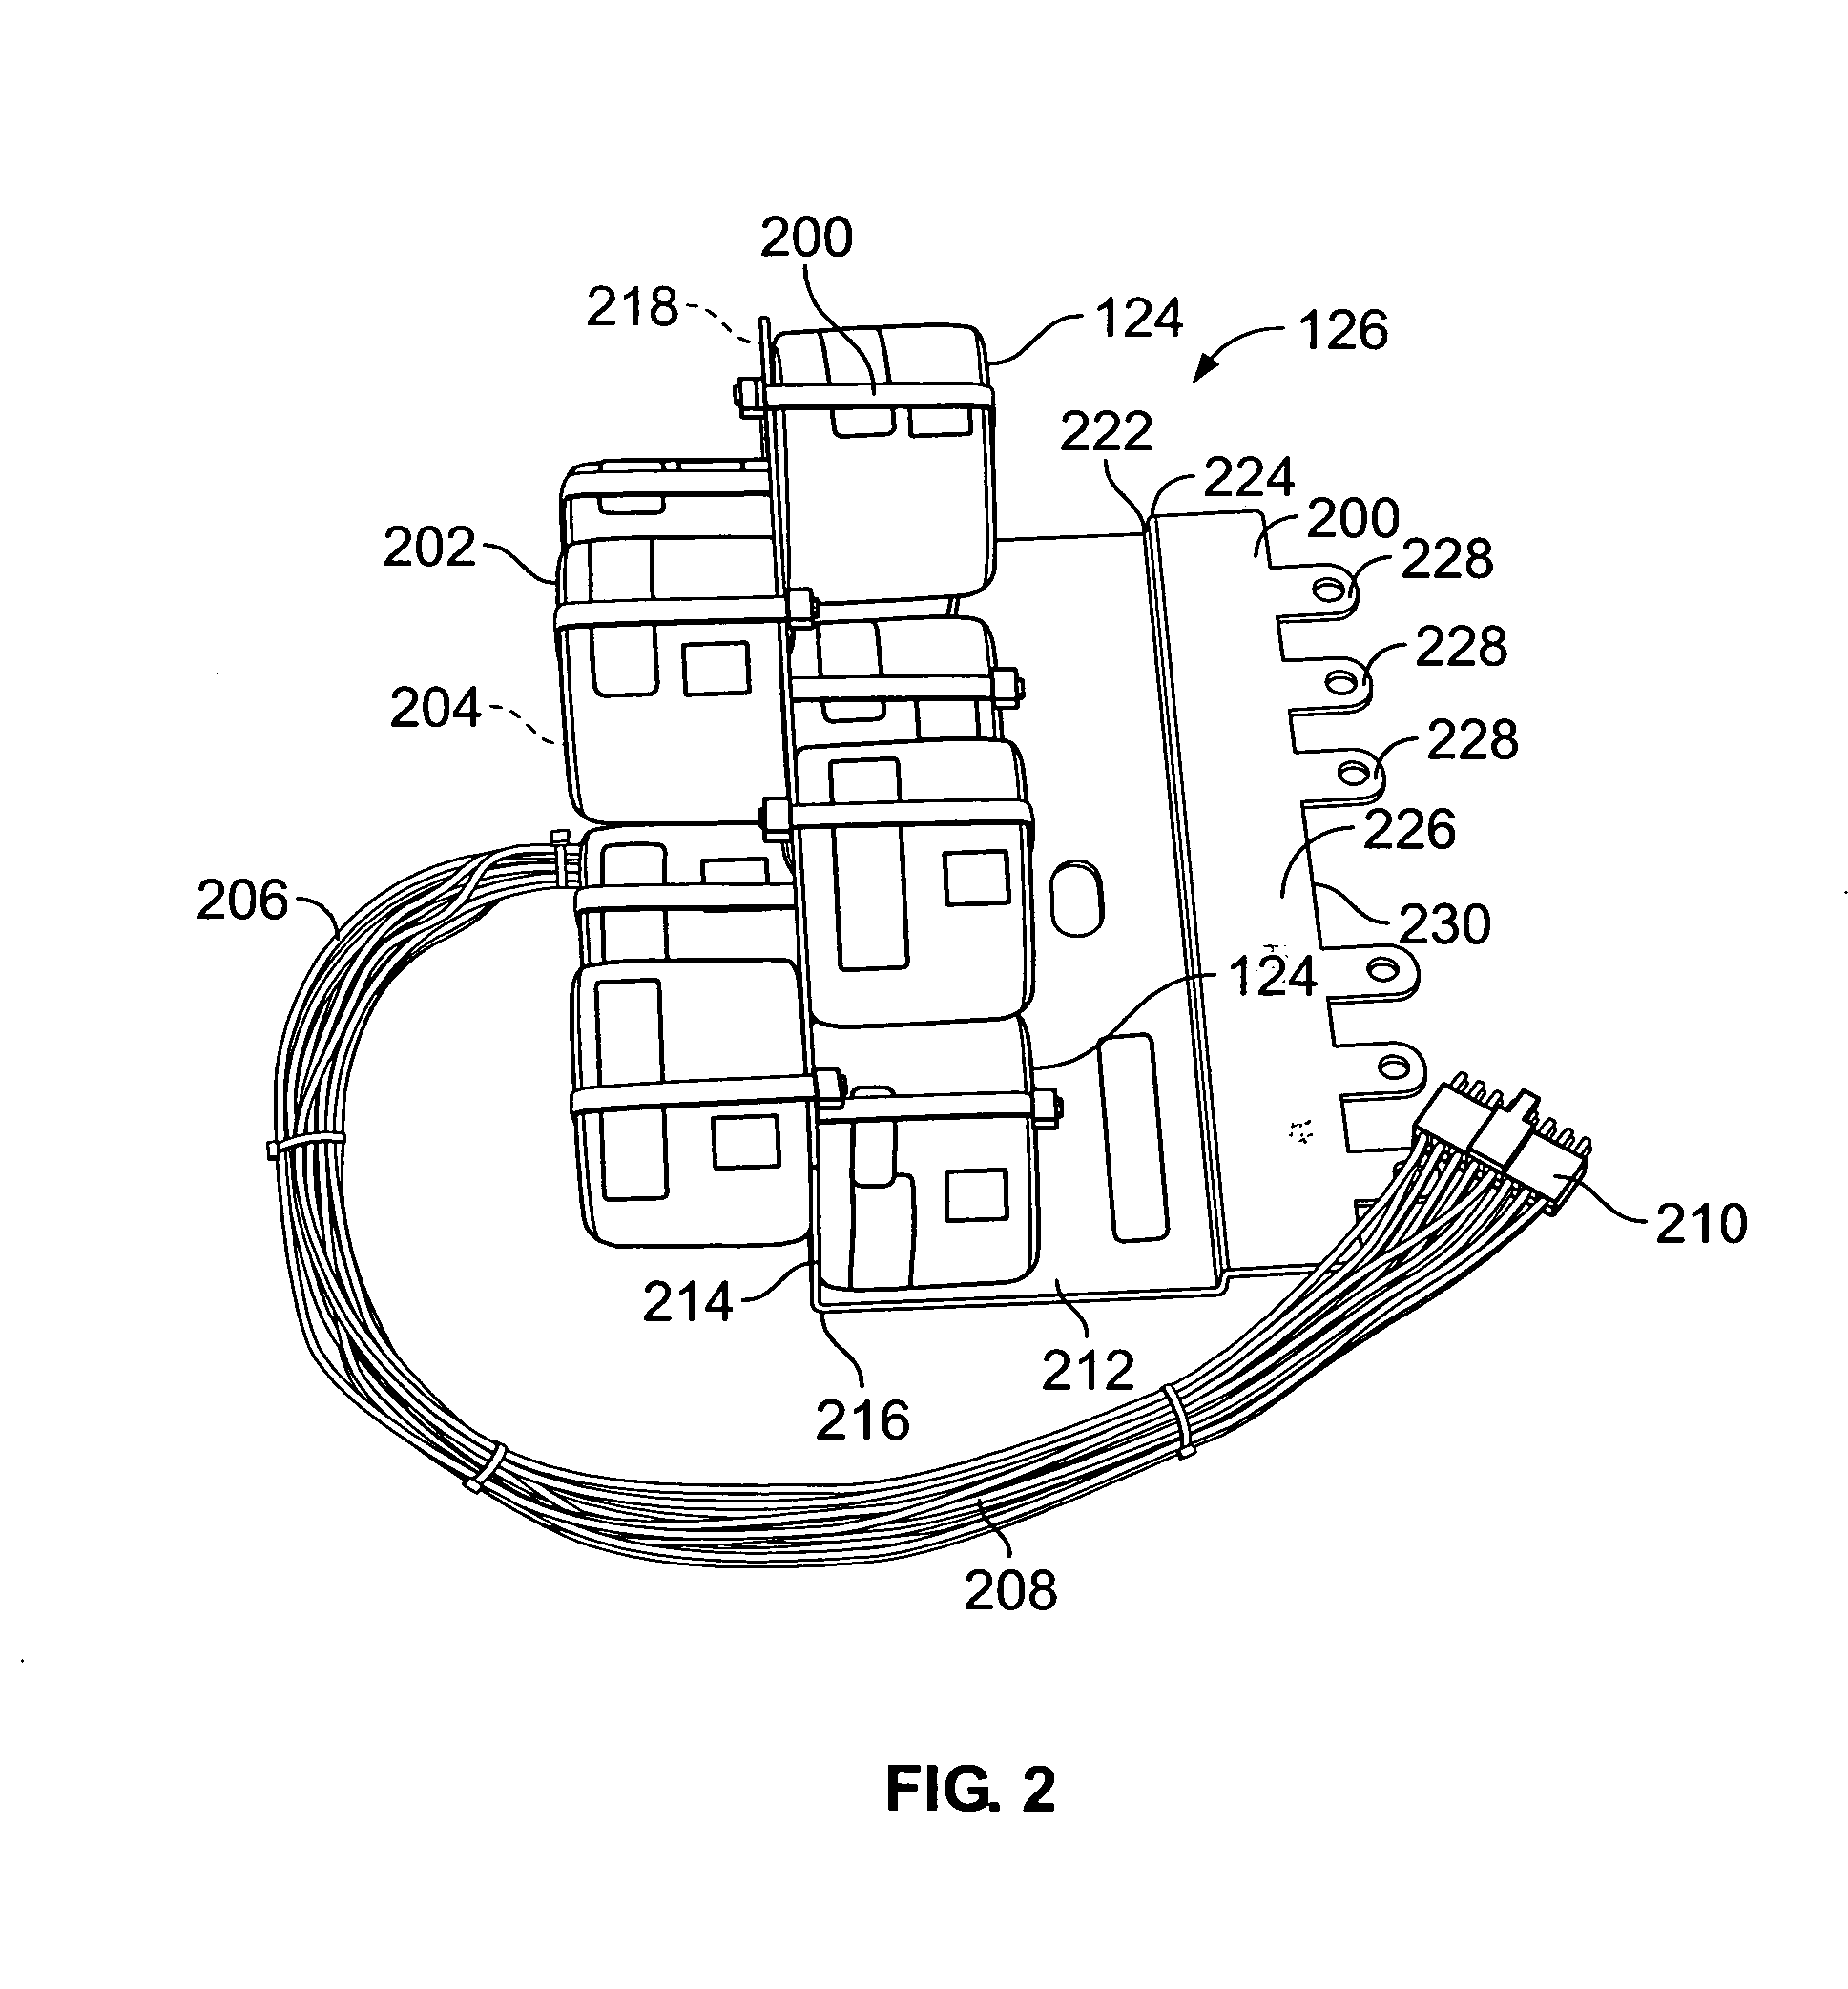 Methods and systems for electric power sub-metering